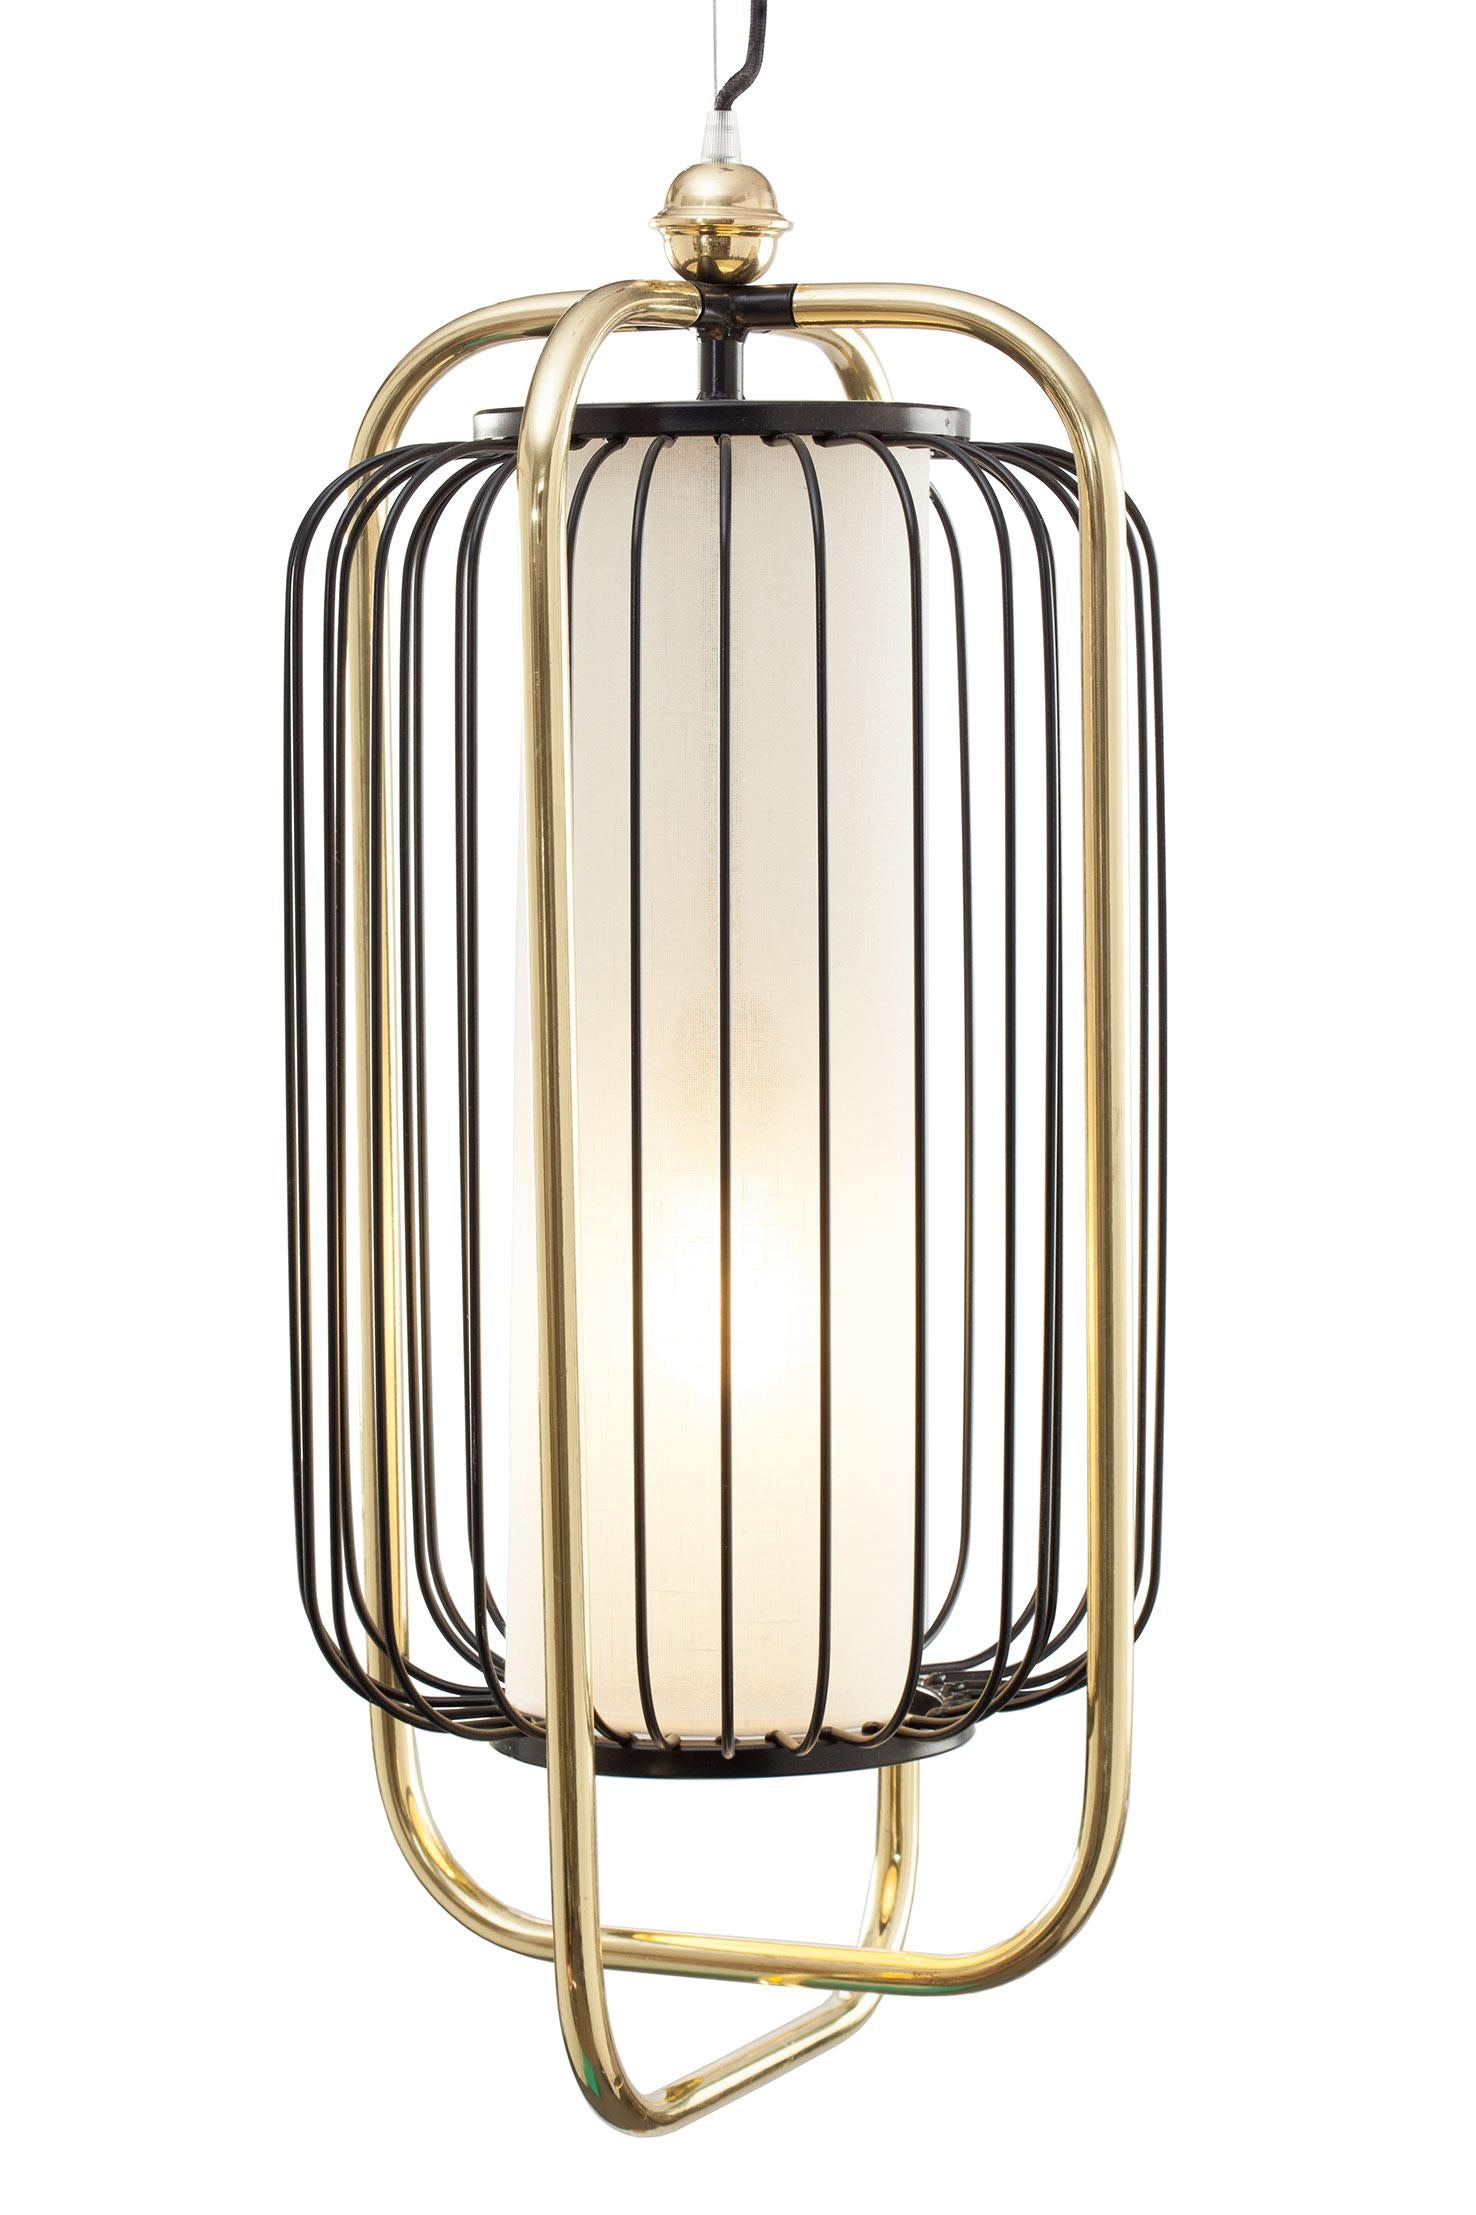 Jules II is all about a timeless, effortless sophistication. A perfect combination of polished brass or copper with fun lacquered metal colors and a soft and elegant linen shade that softly diffuses the light enclosed in the structure.
The structure